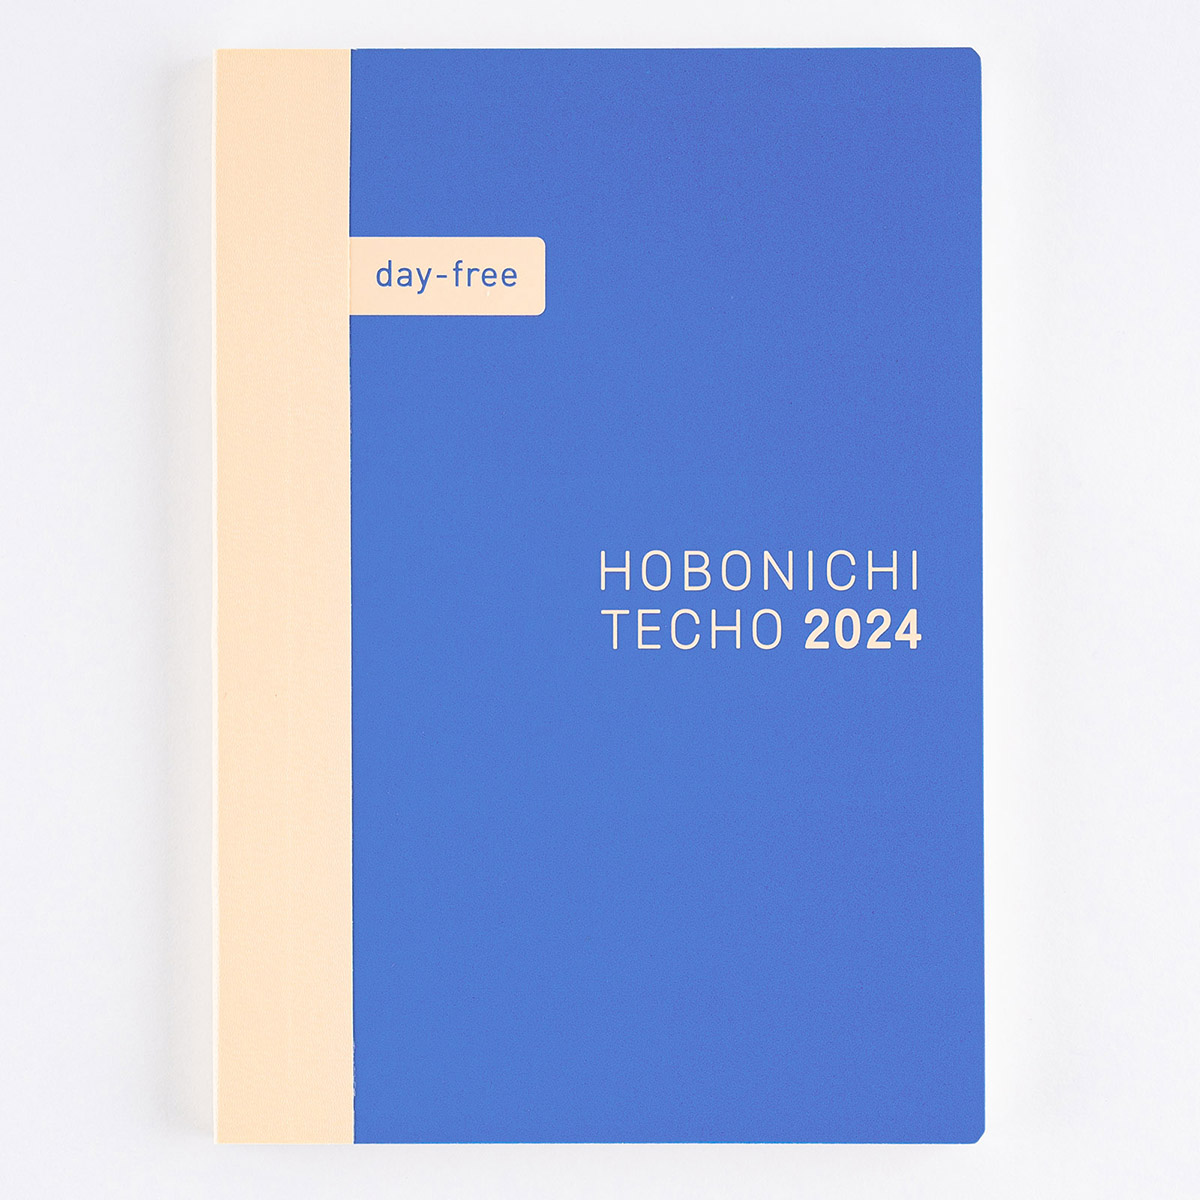 Hobonichi Techo 2024 Japanese DayFree Book A6 Size A6 size / Monthly